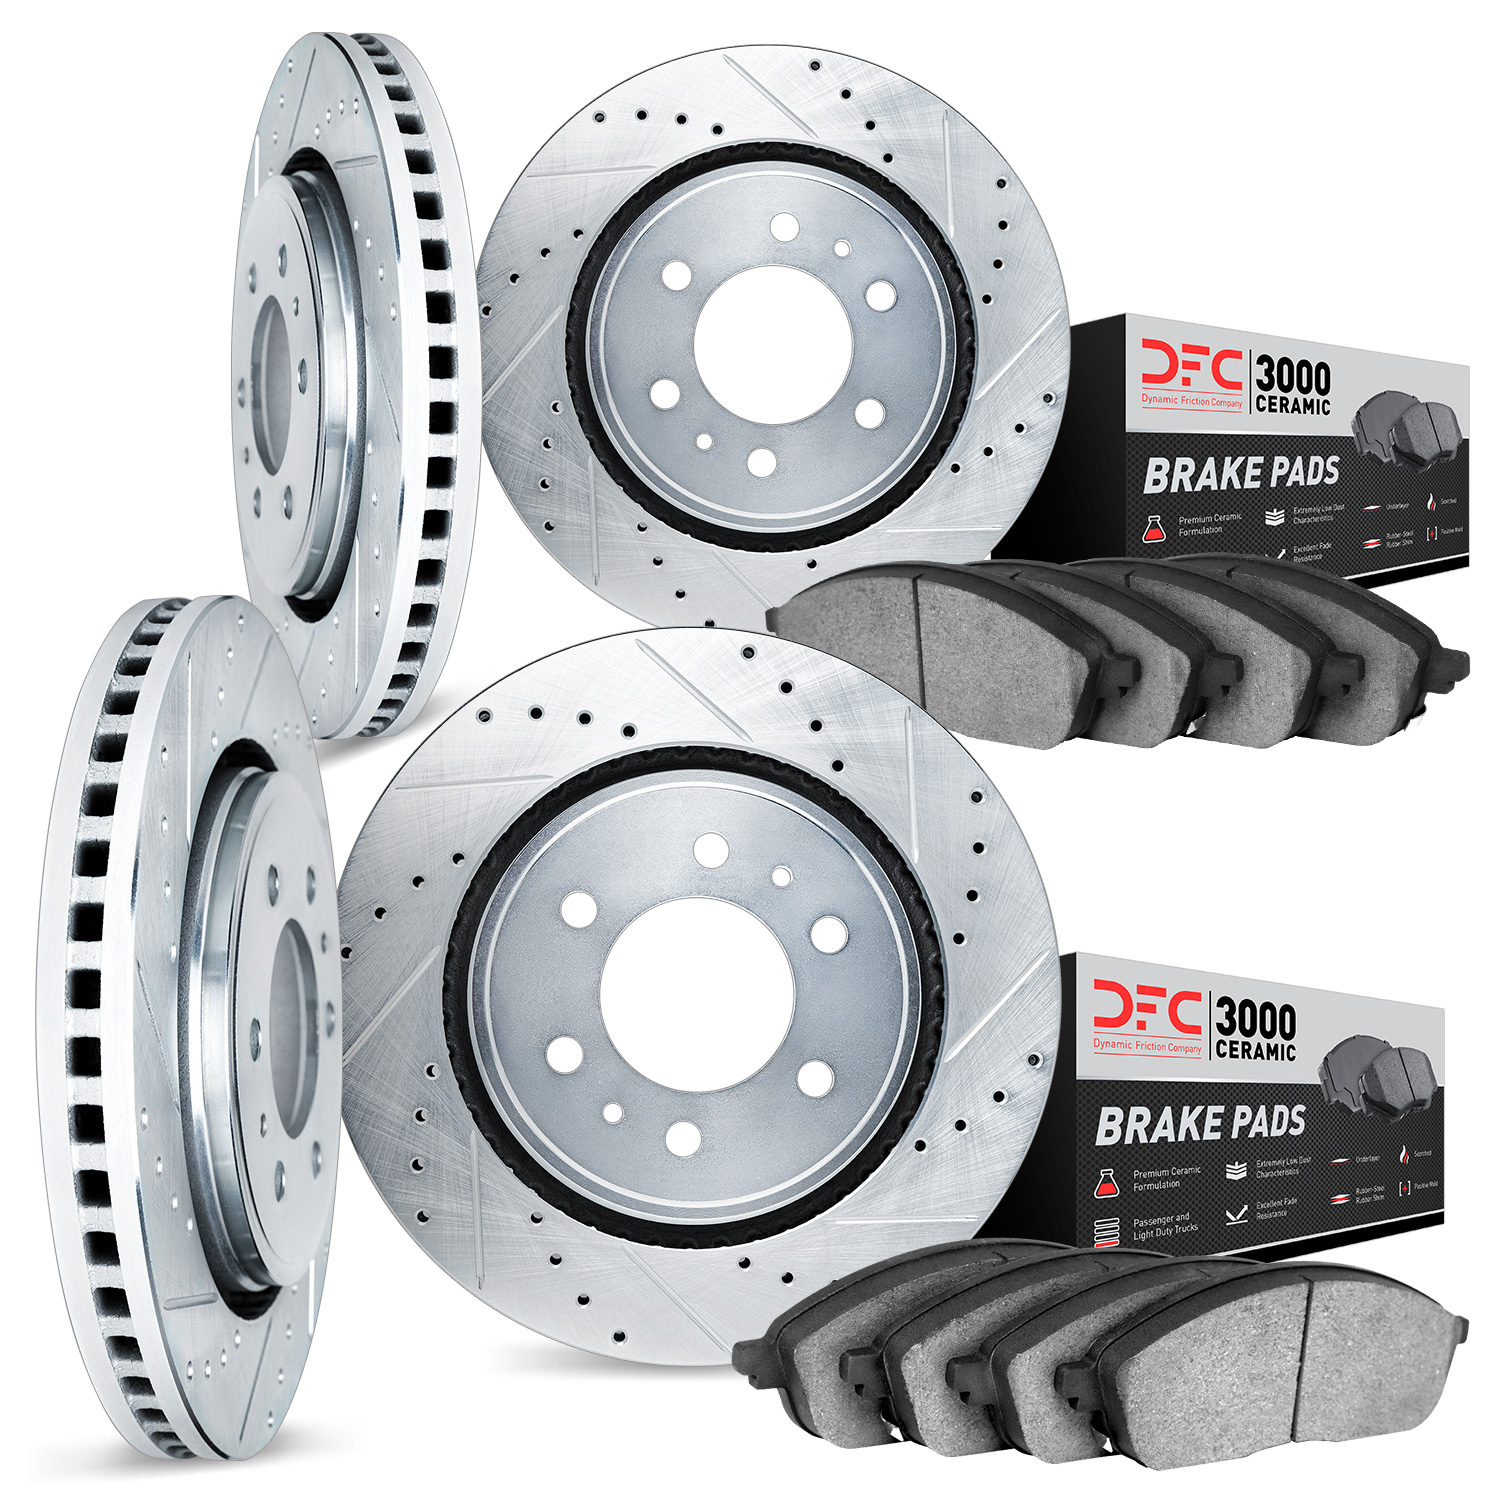 7304-67057 Drilled/Slotted Brake Rotor with 3000-Series Ceramic Brake Pads Kit [Silver], Fits Select Multiple Makes/Models, Posi